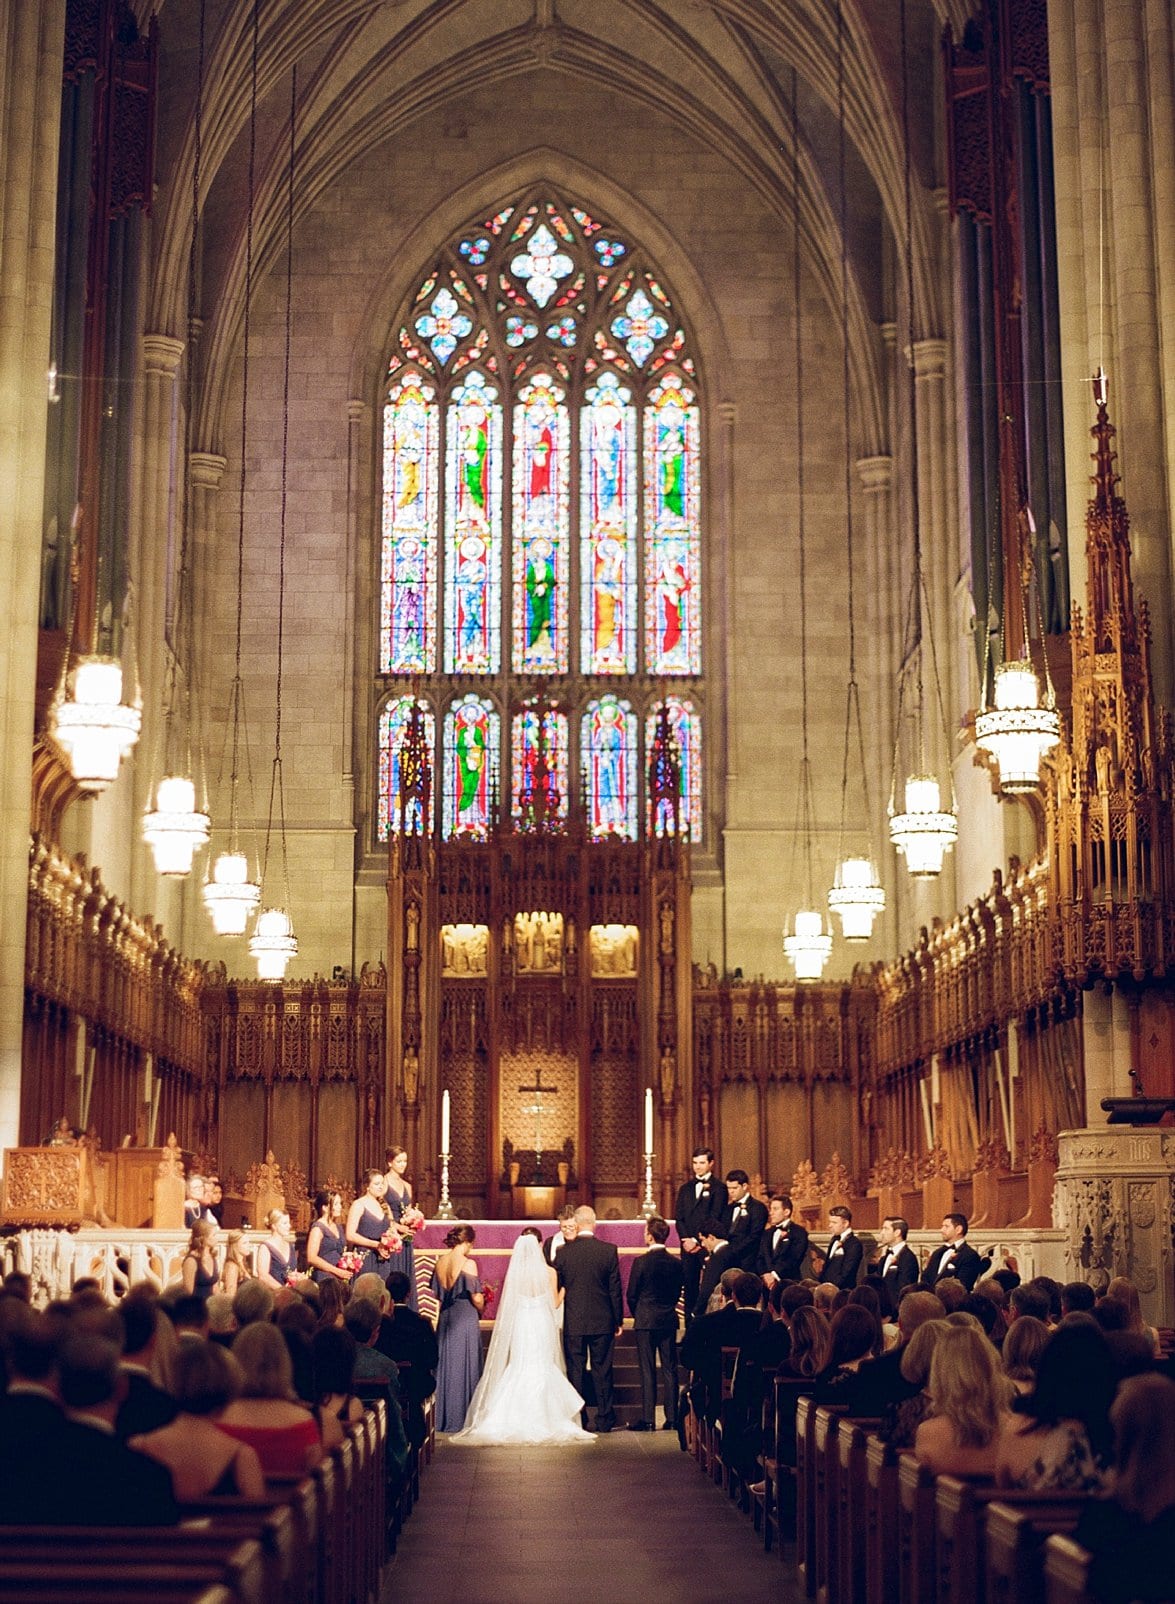 Duke Chapel wedding ceremony bride and groom standing together at the front of the room photo